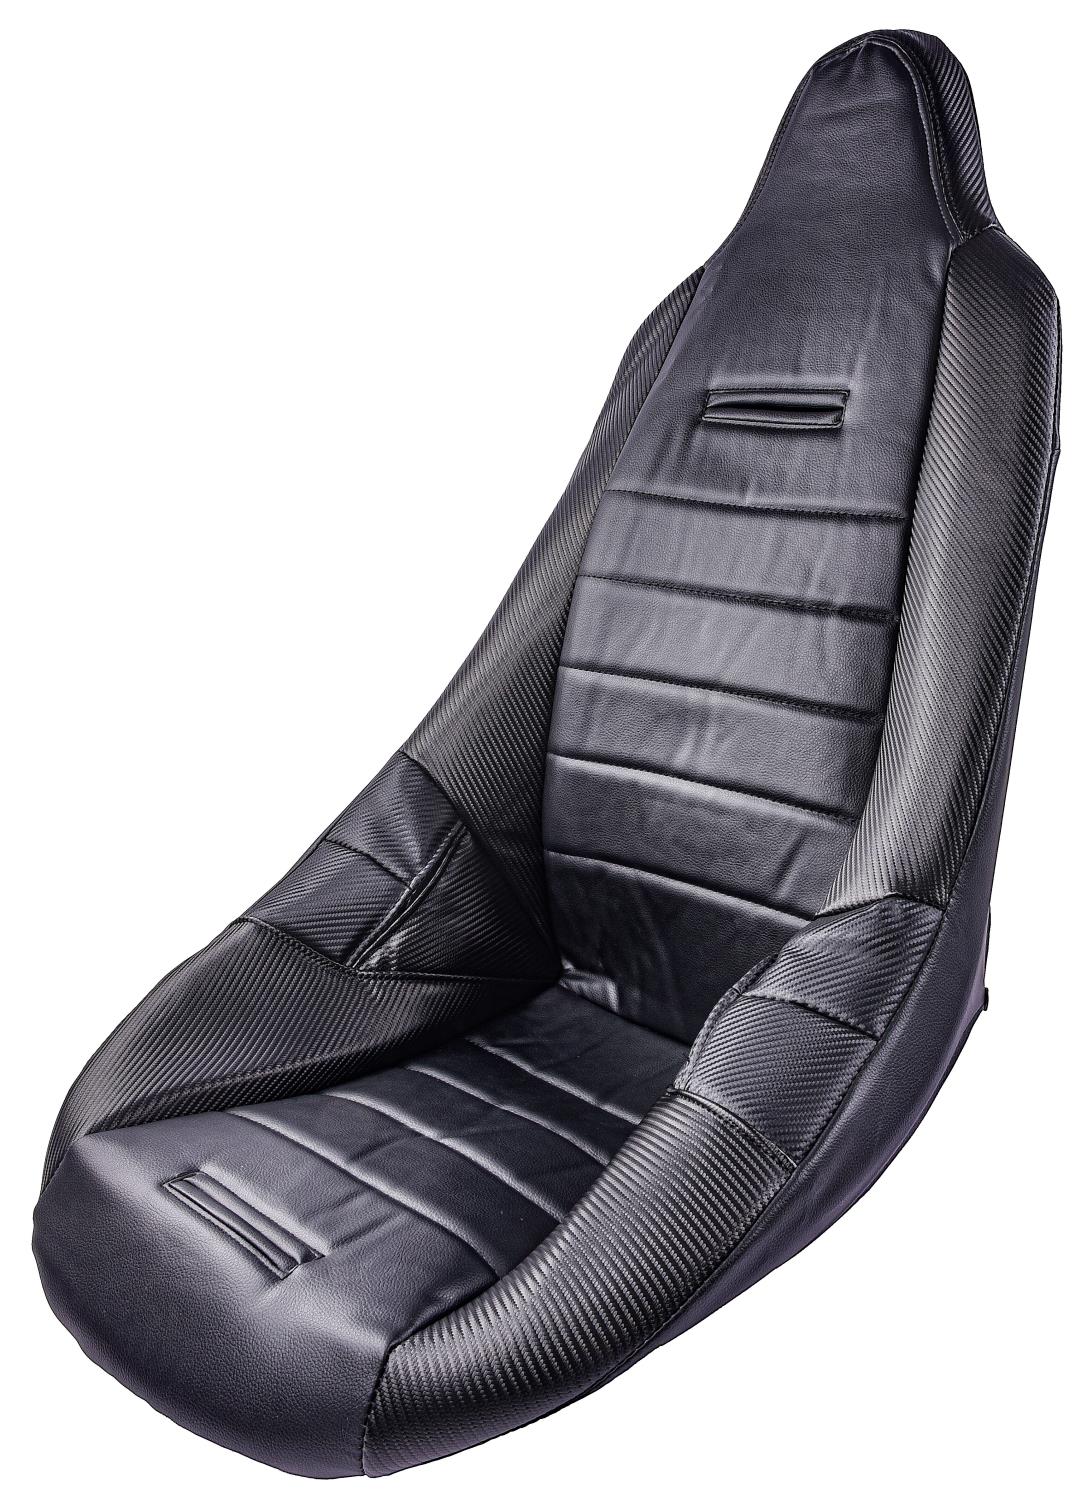 Pro High Back Custom Seat Cover Black with Faux Carbon Fiber Trim